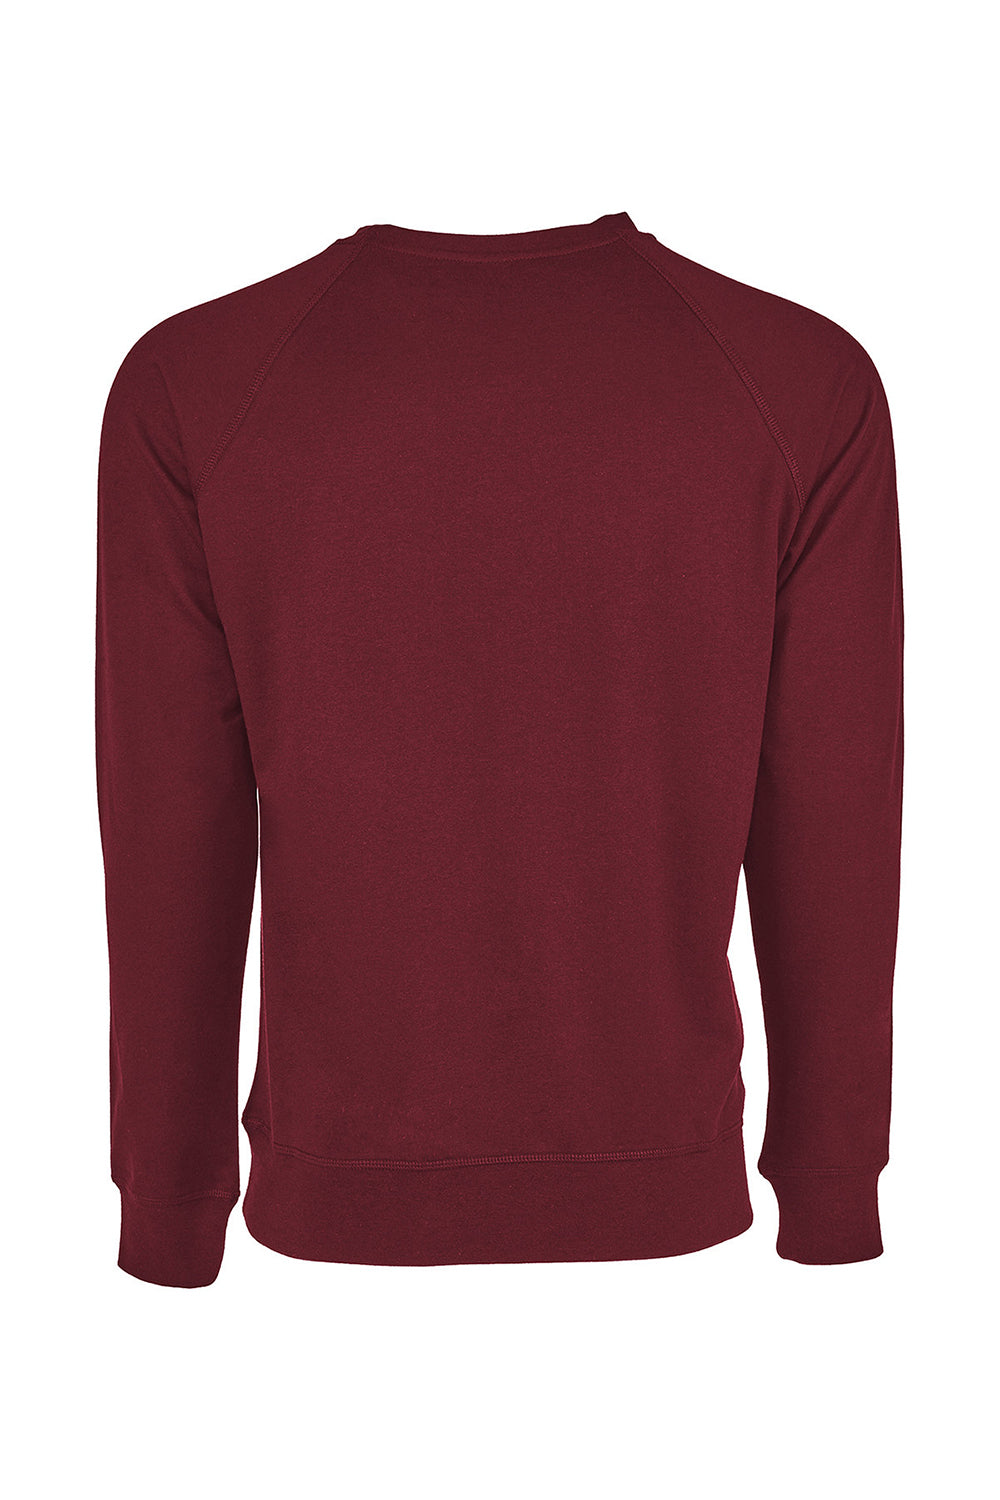 Next Level N9000/9000 Mens French Terry Long Sleeve Crewneck T-Shirt Cardinal Red Flat Back